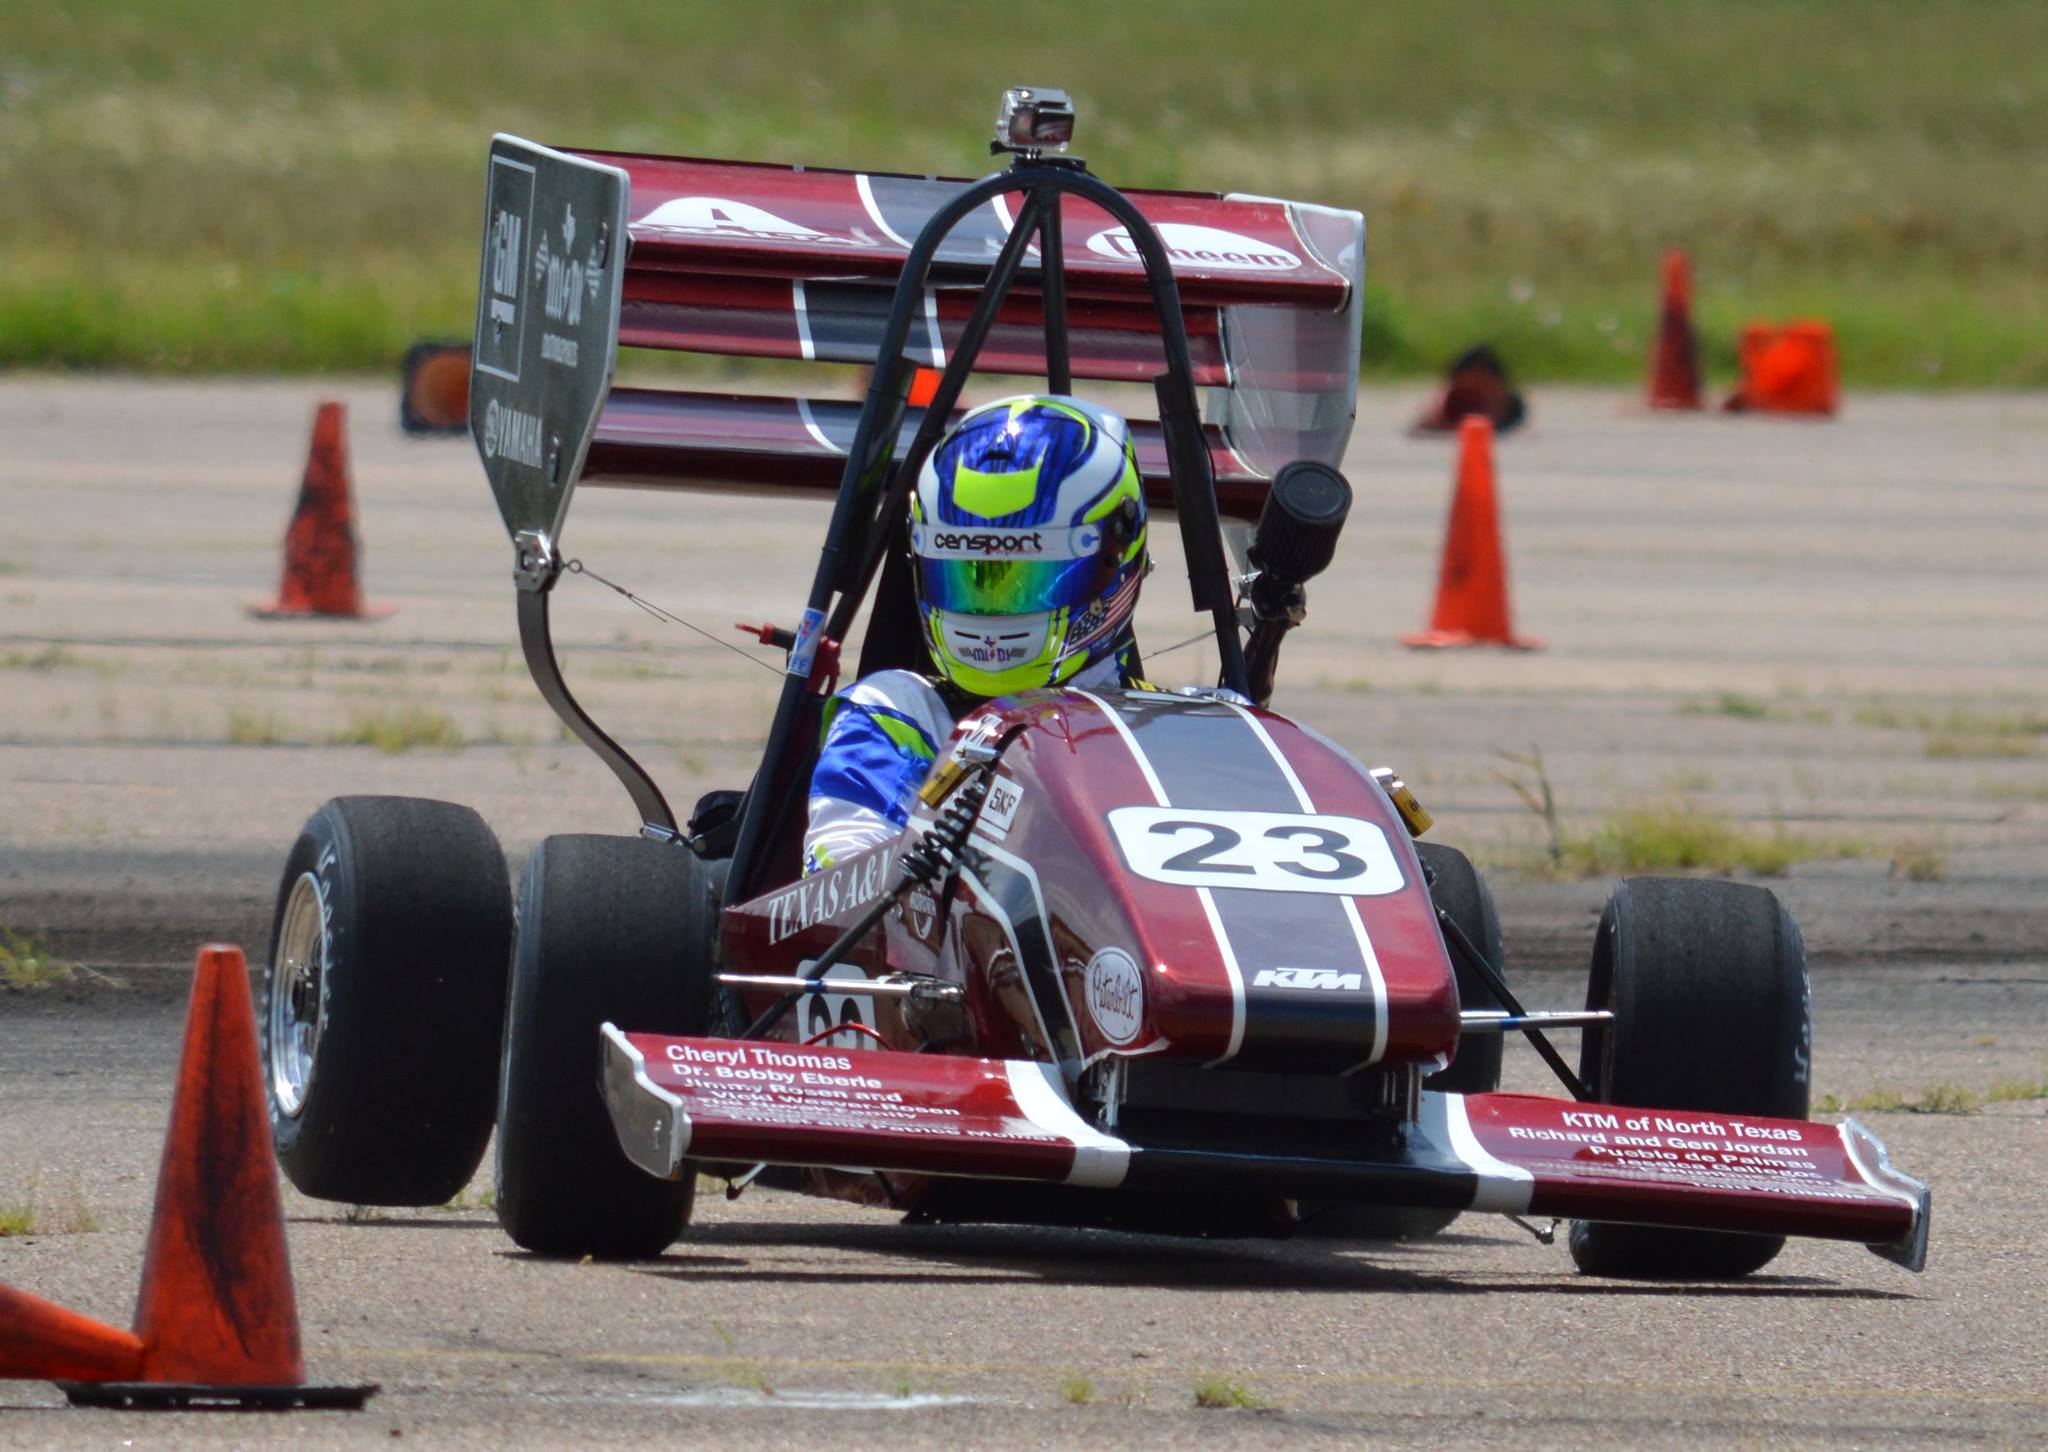 Person in blue, white and neon green racing suit and helmet in maroon, black and white race car. Number on front of car is 23.